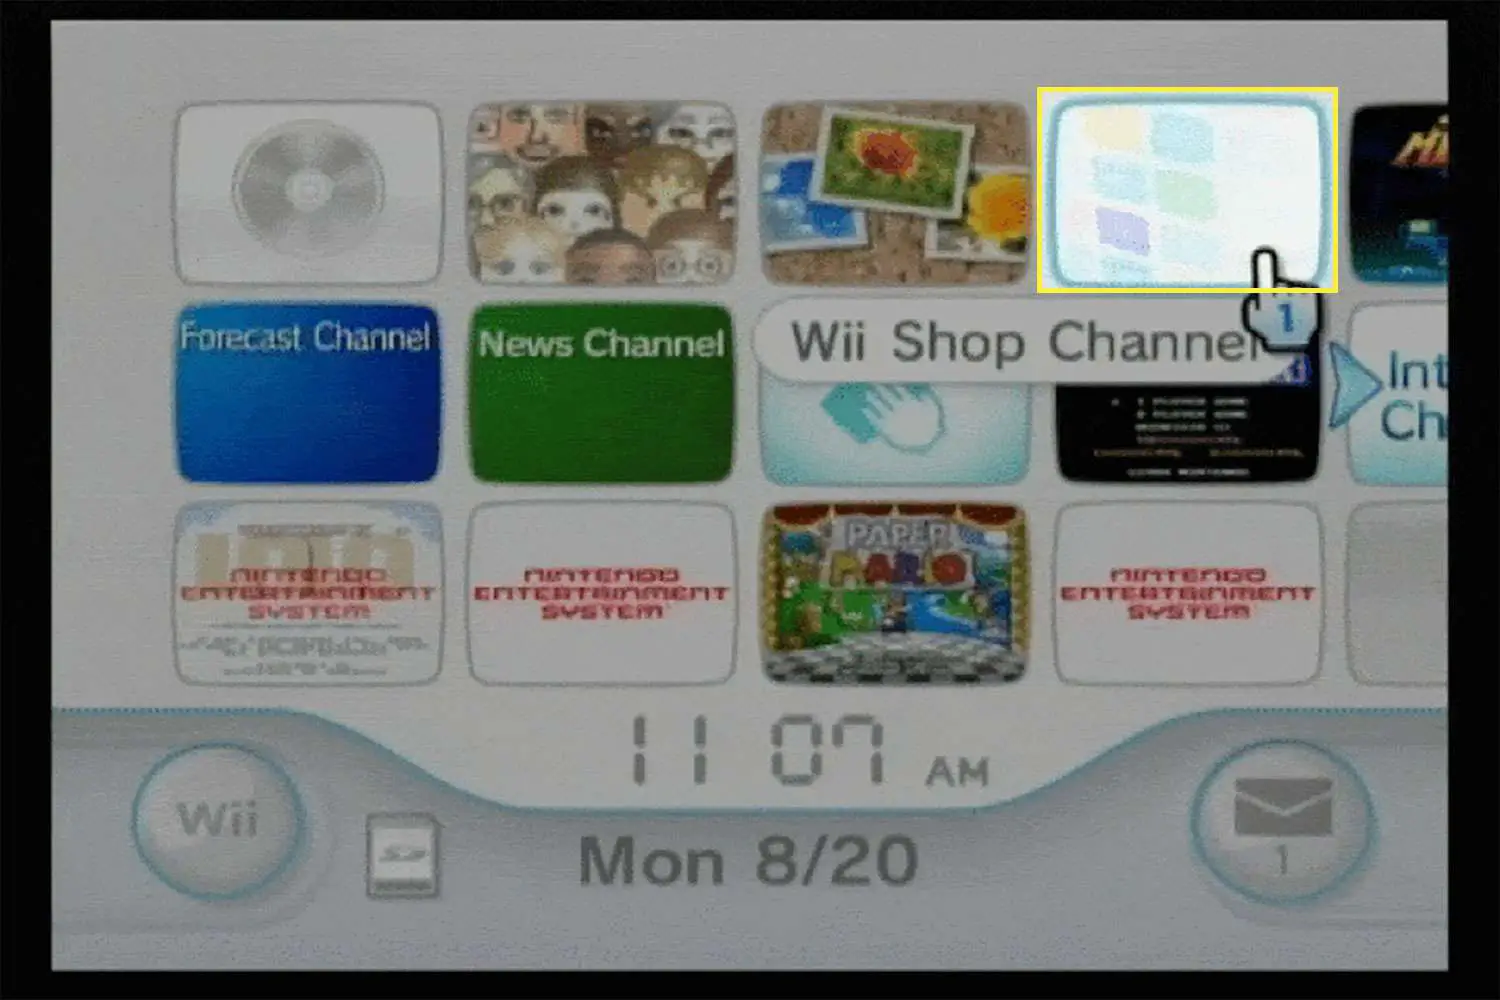 O Wii Shop Channel no painel do Wii